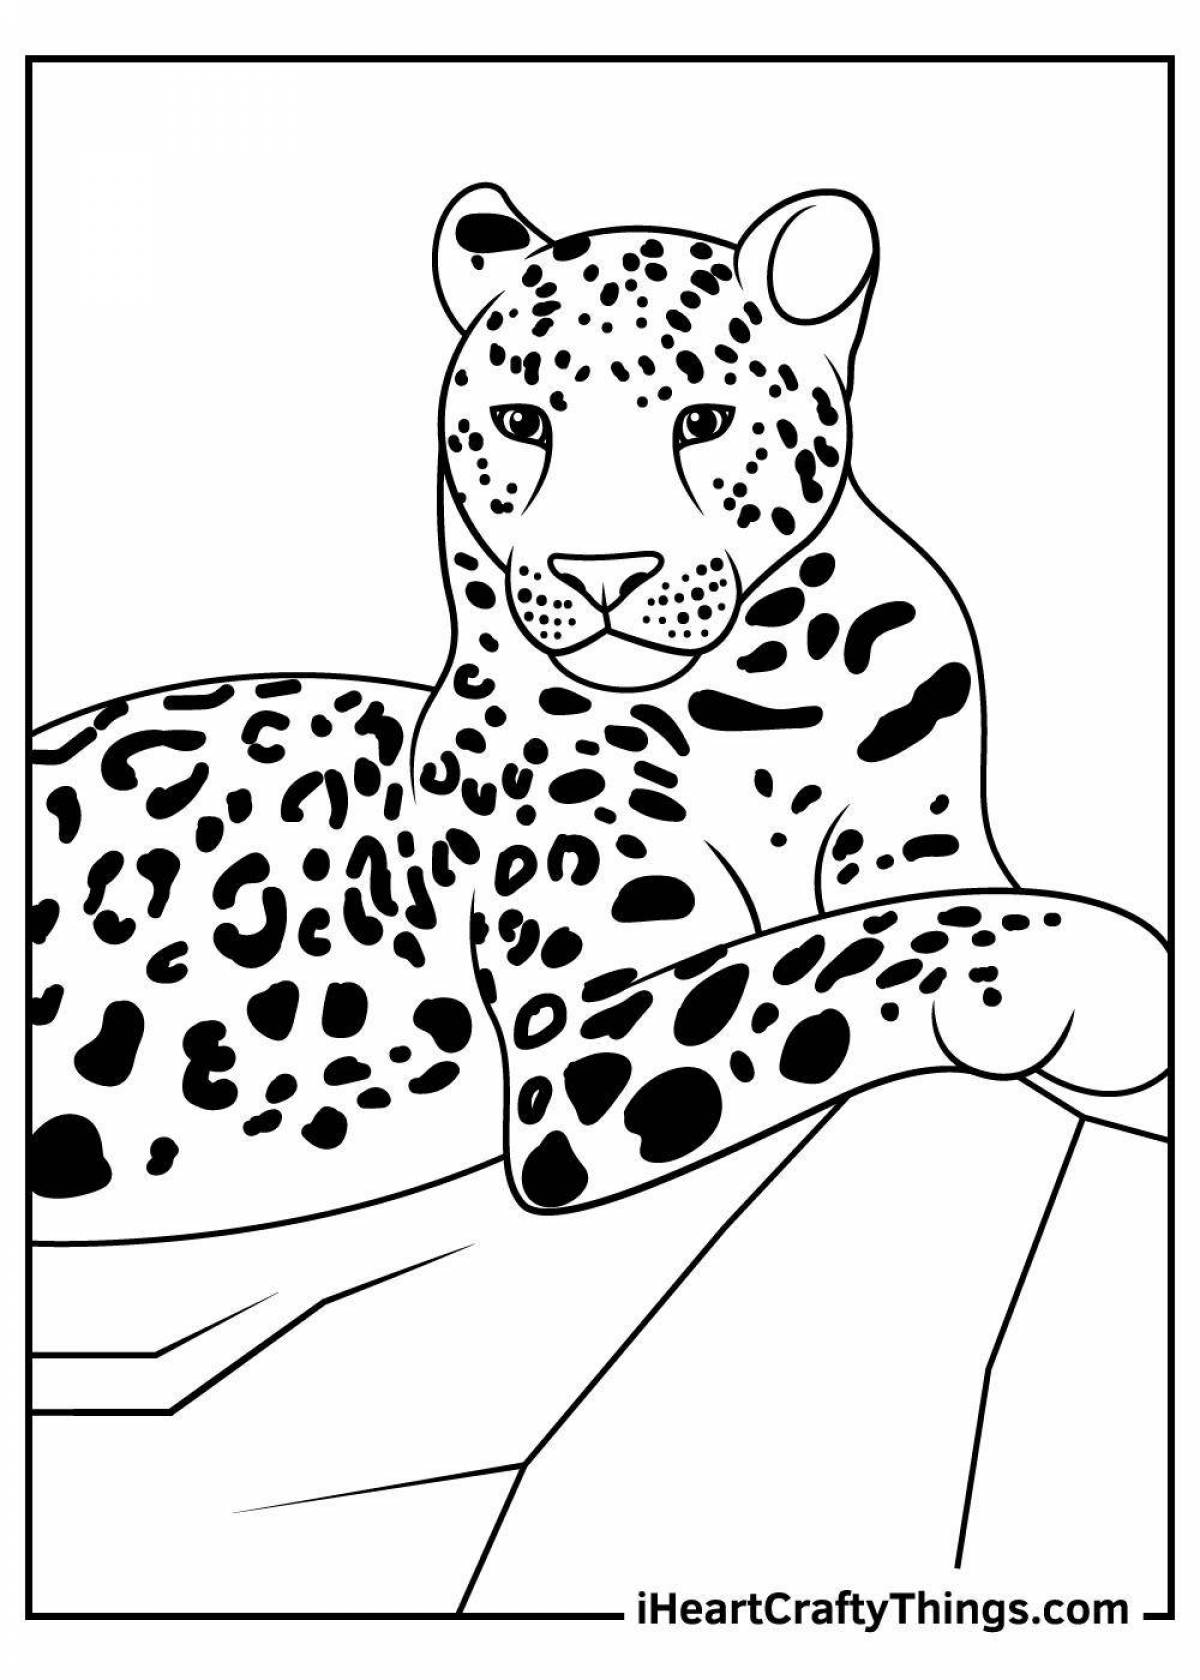 Colorful leopard coloring book for children 5-6 years old